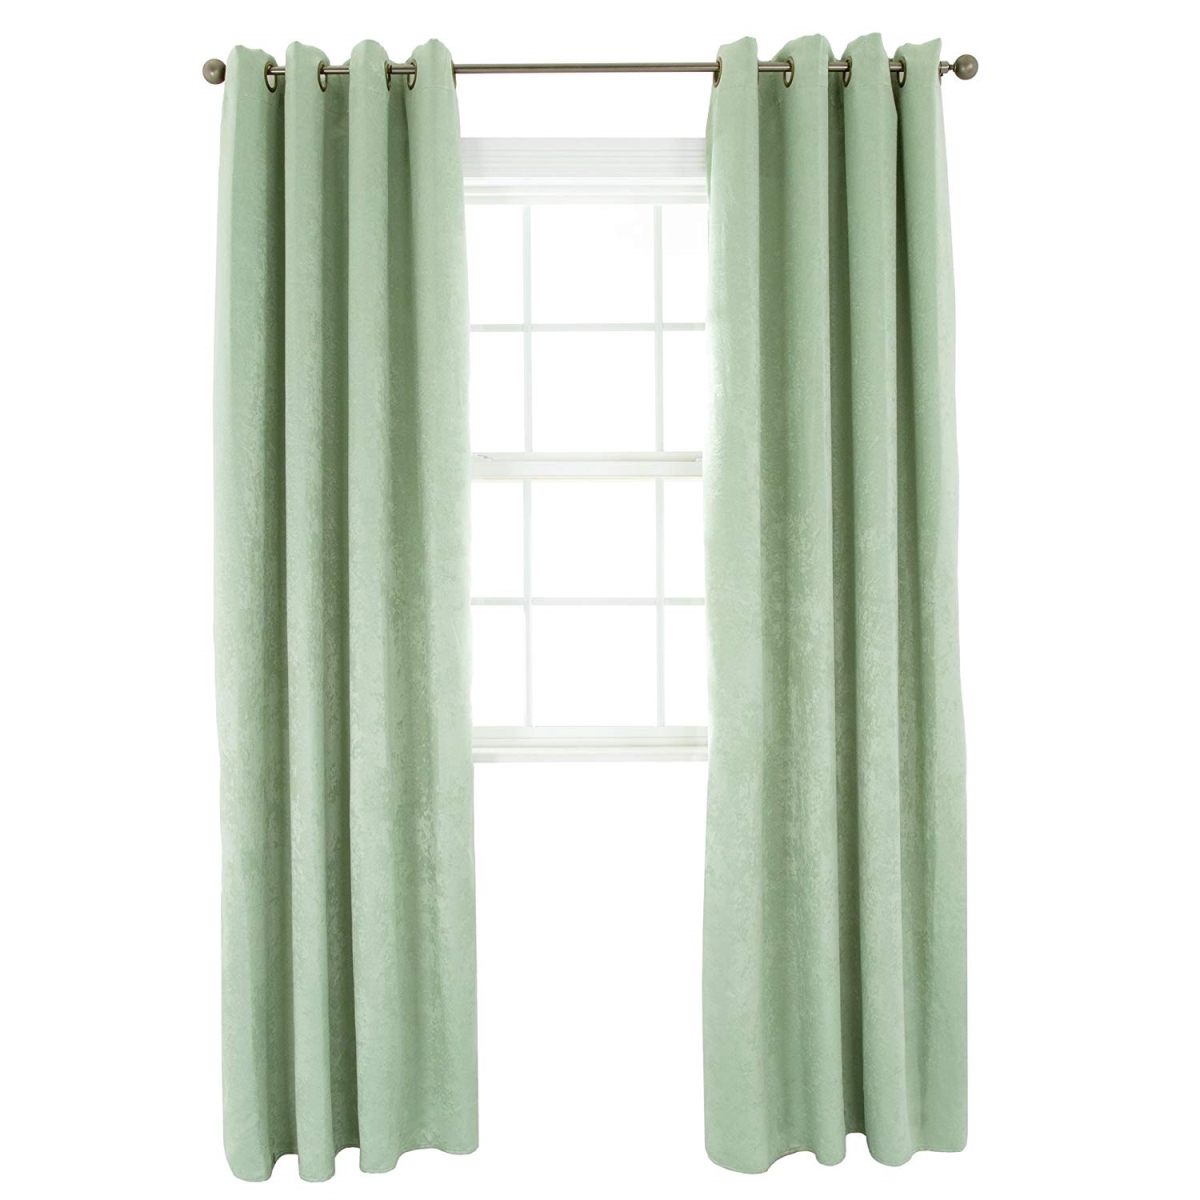 63a-43794 Mila Black Out Curtain Panel, Light Sage - 84 In.